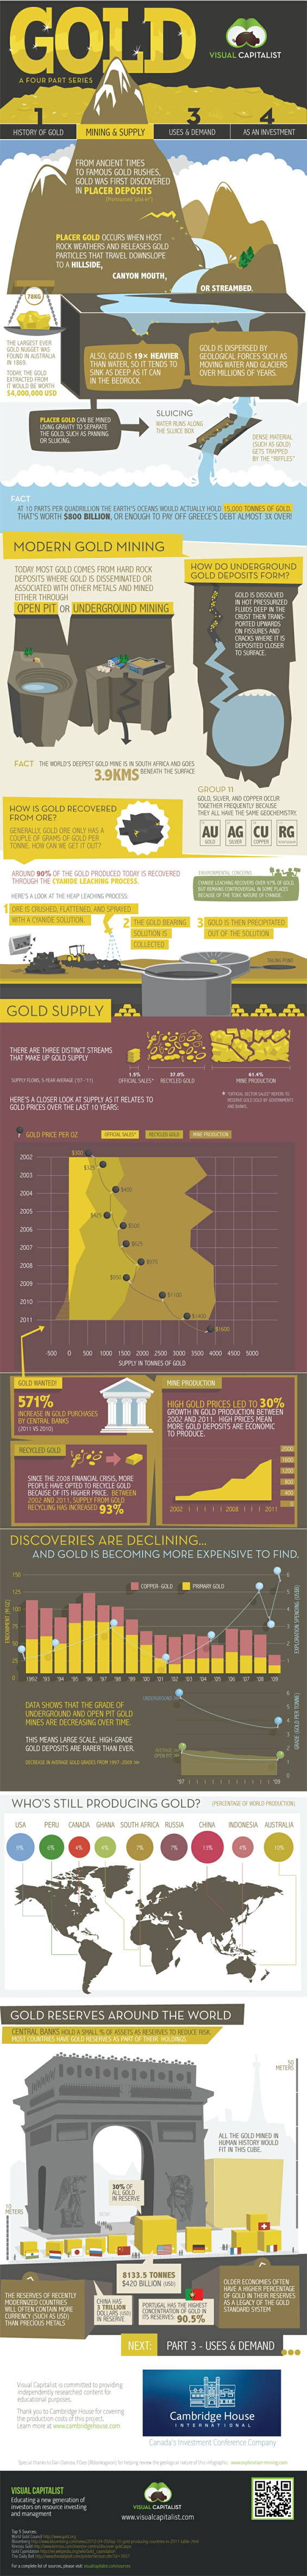 history of gold infographic